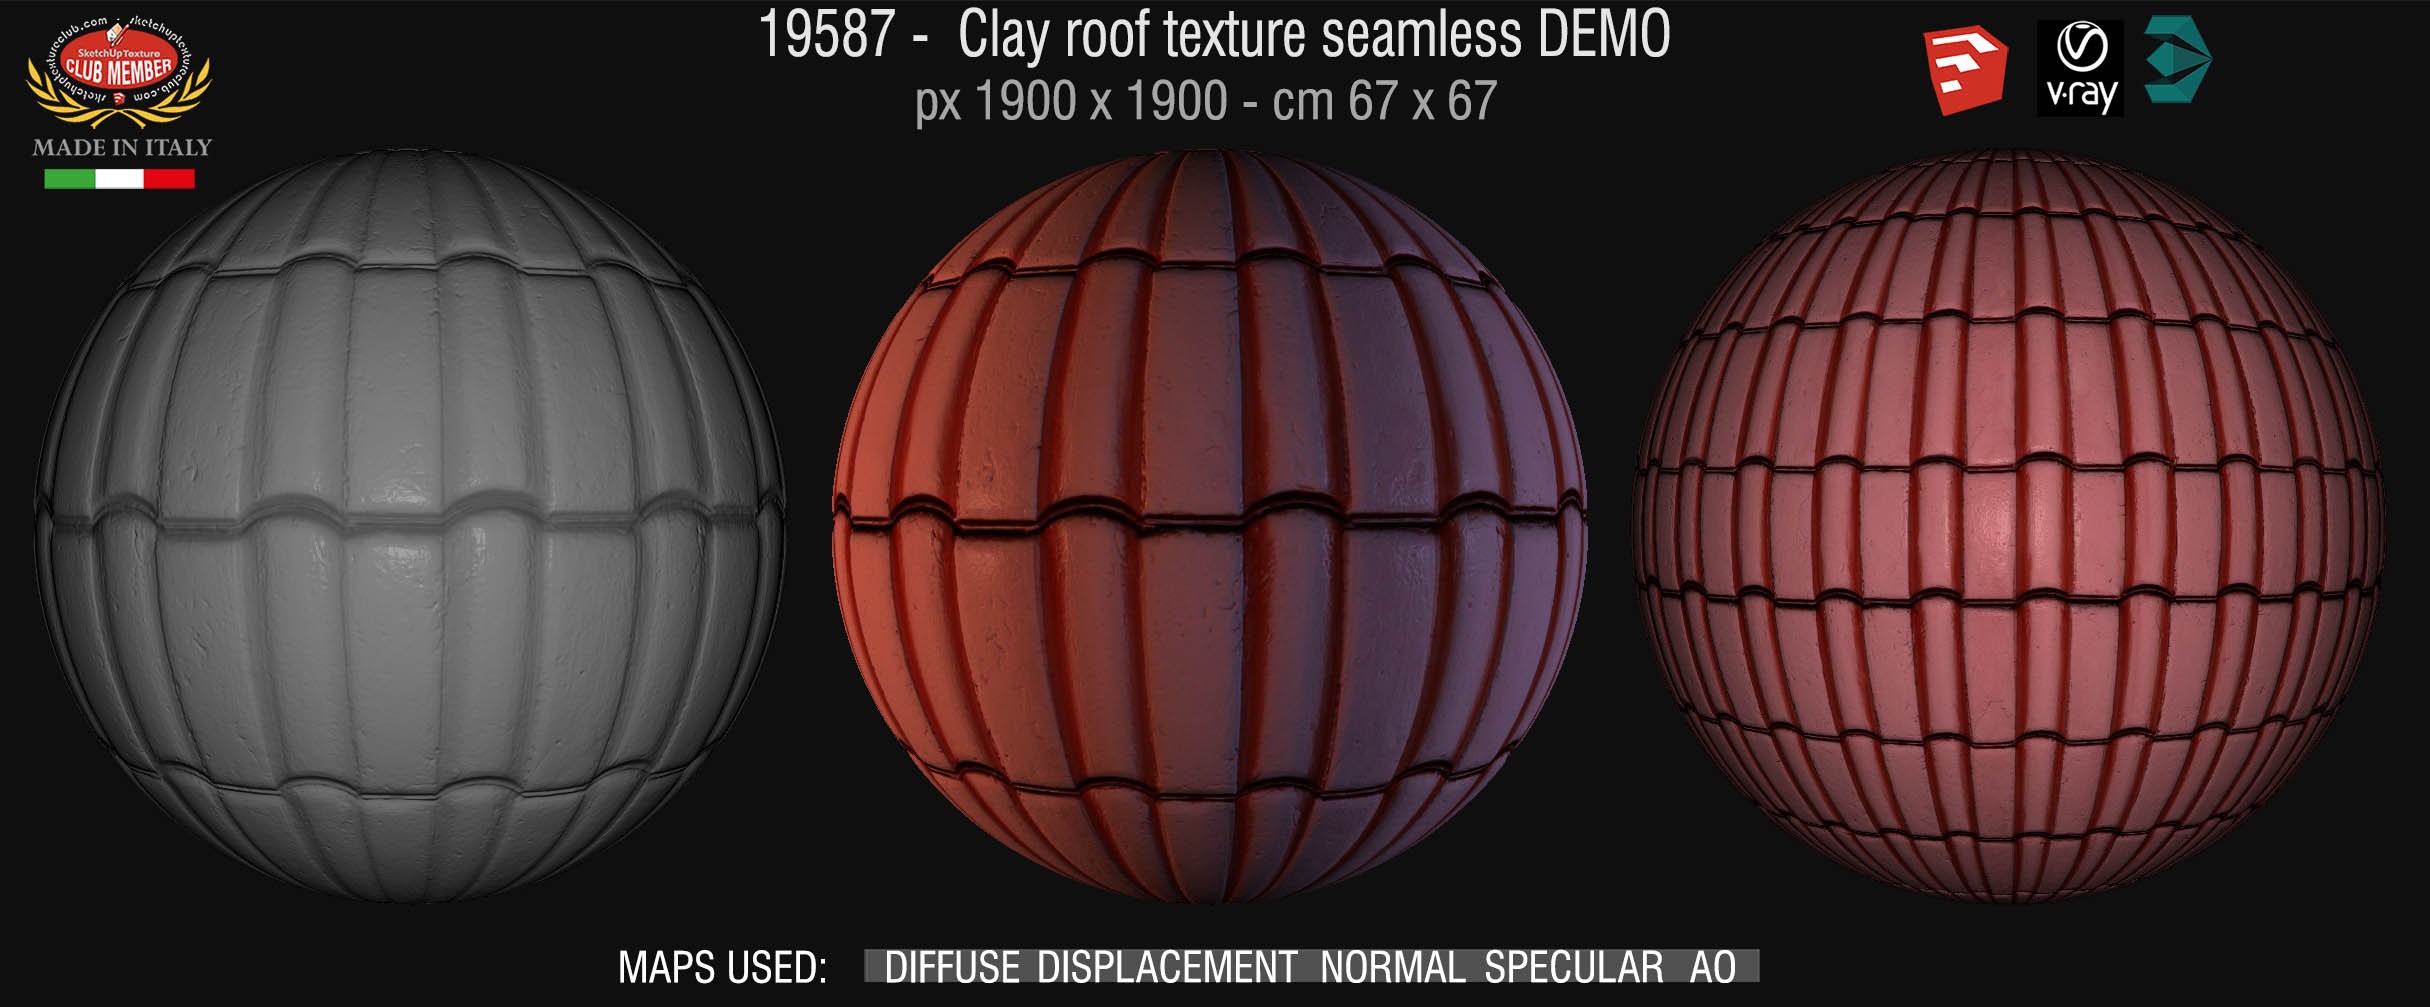 19587 Clay roof texture seamless + maps DEMO